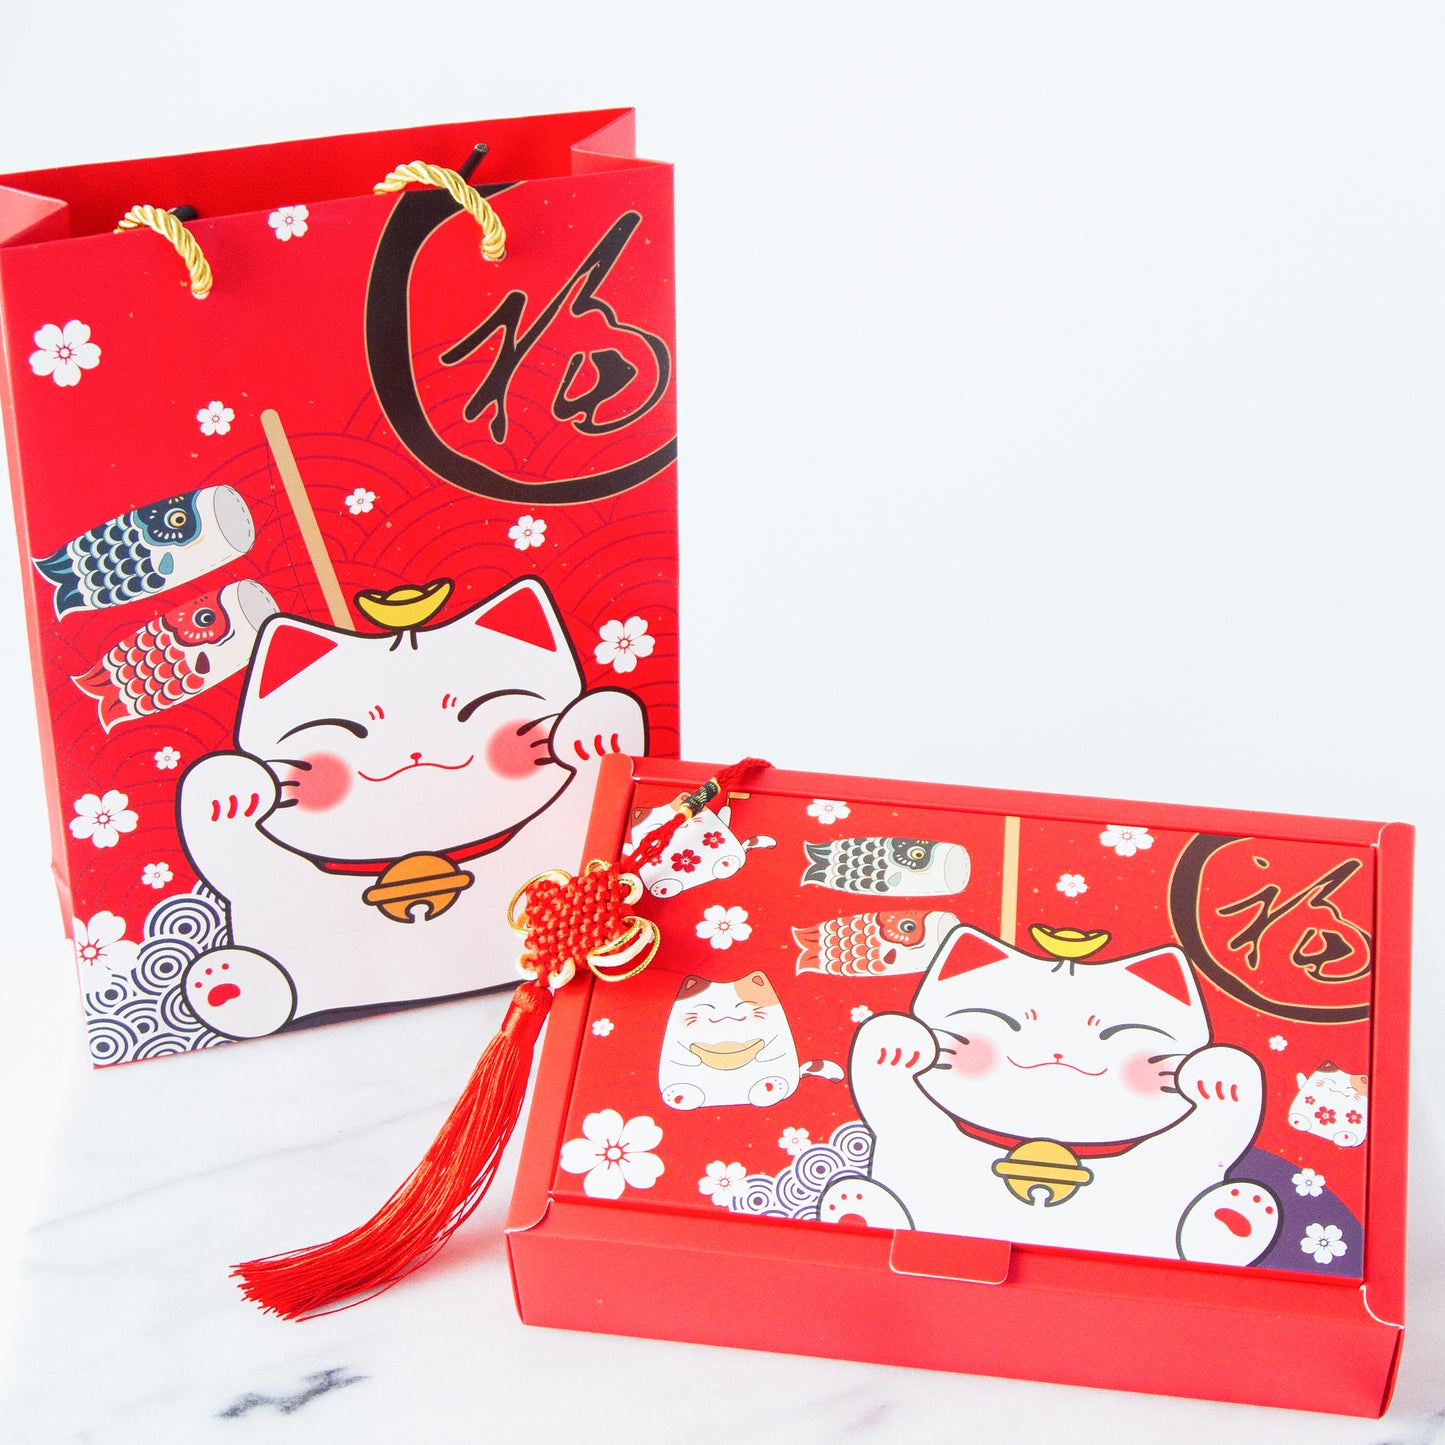 Year Of The Dragon! | 18 pcs brownies gift set |$29.80 nett only